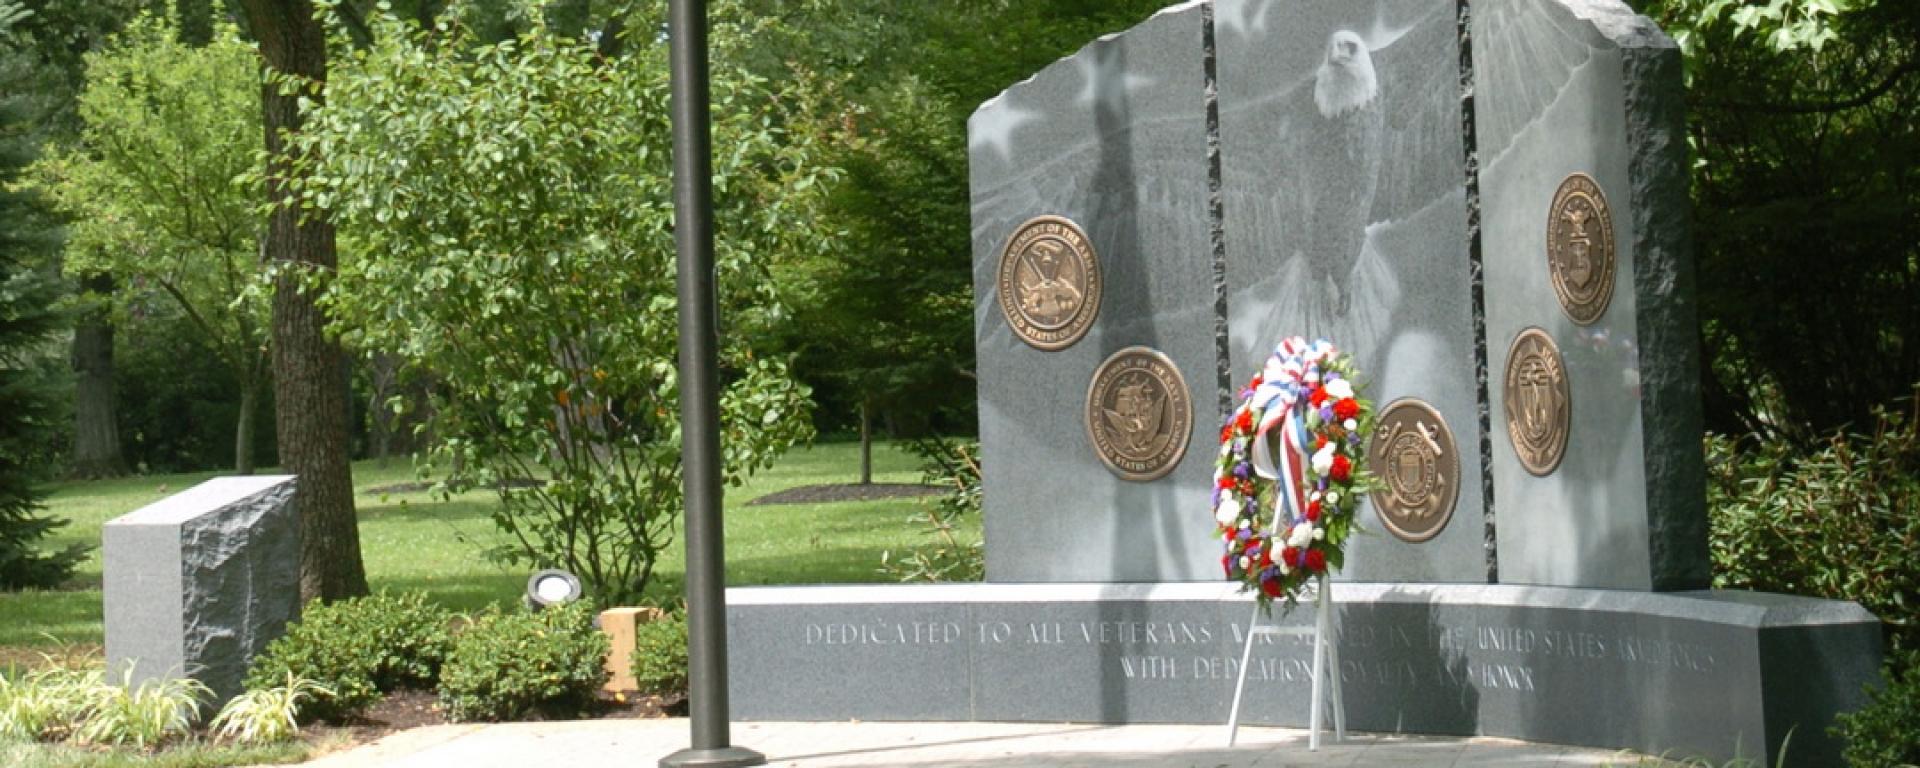 memorial with wreath in front